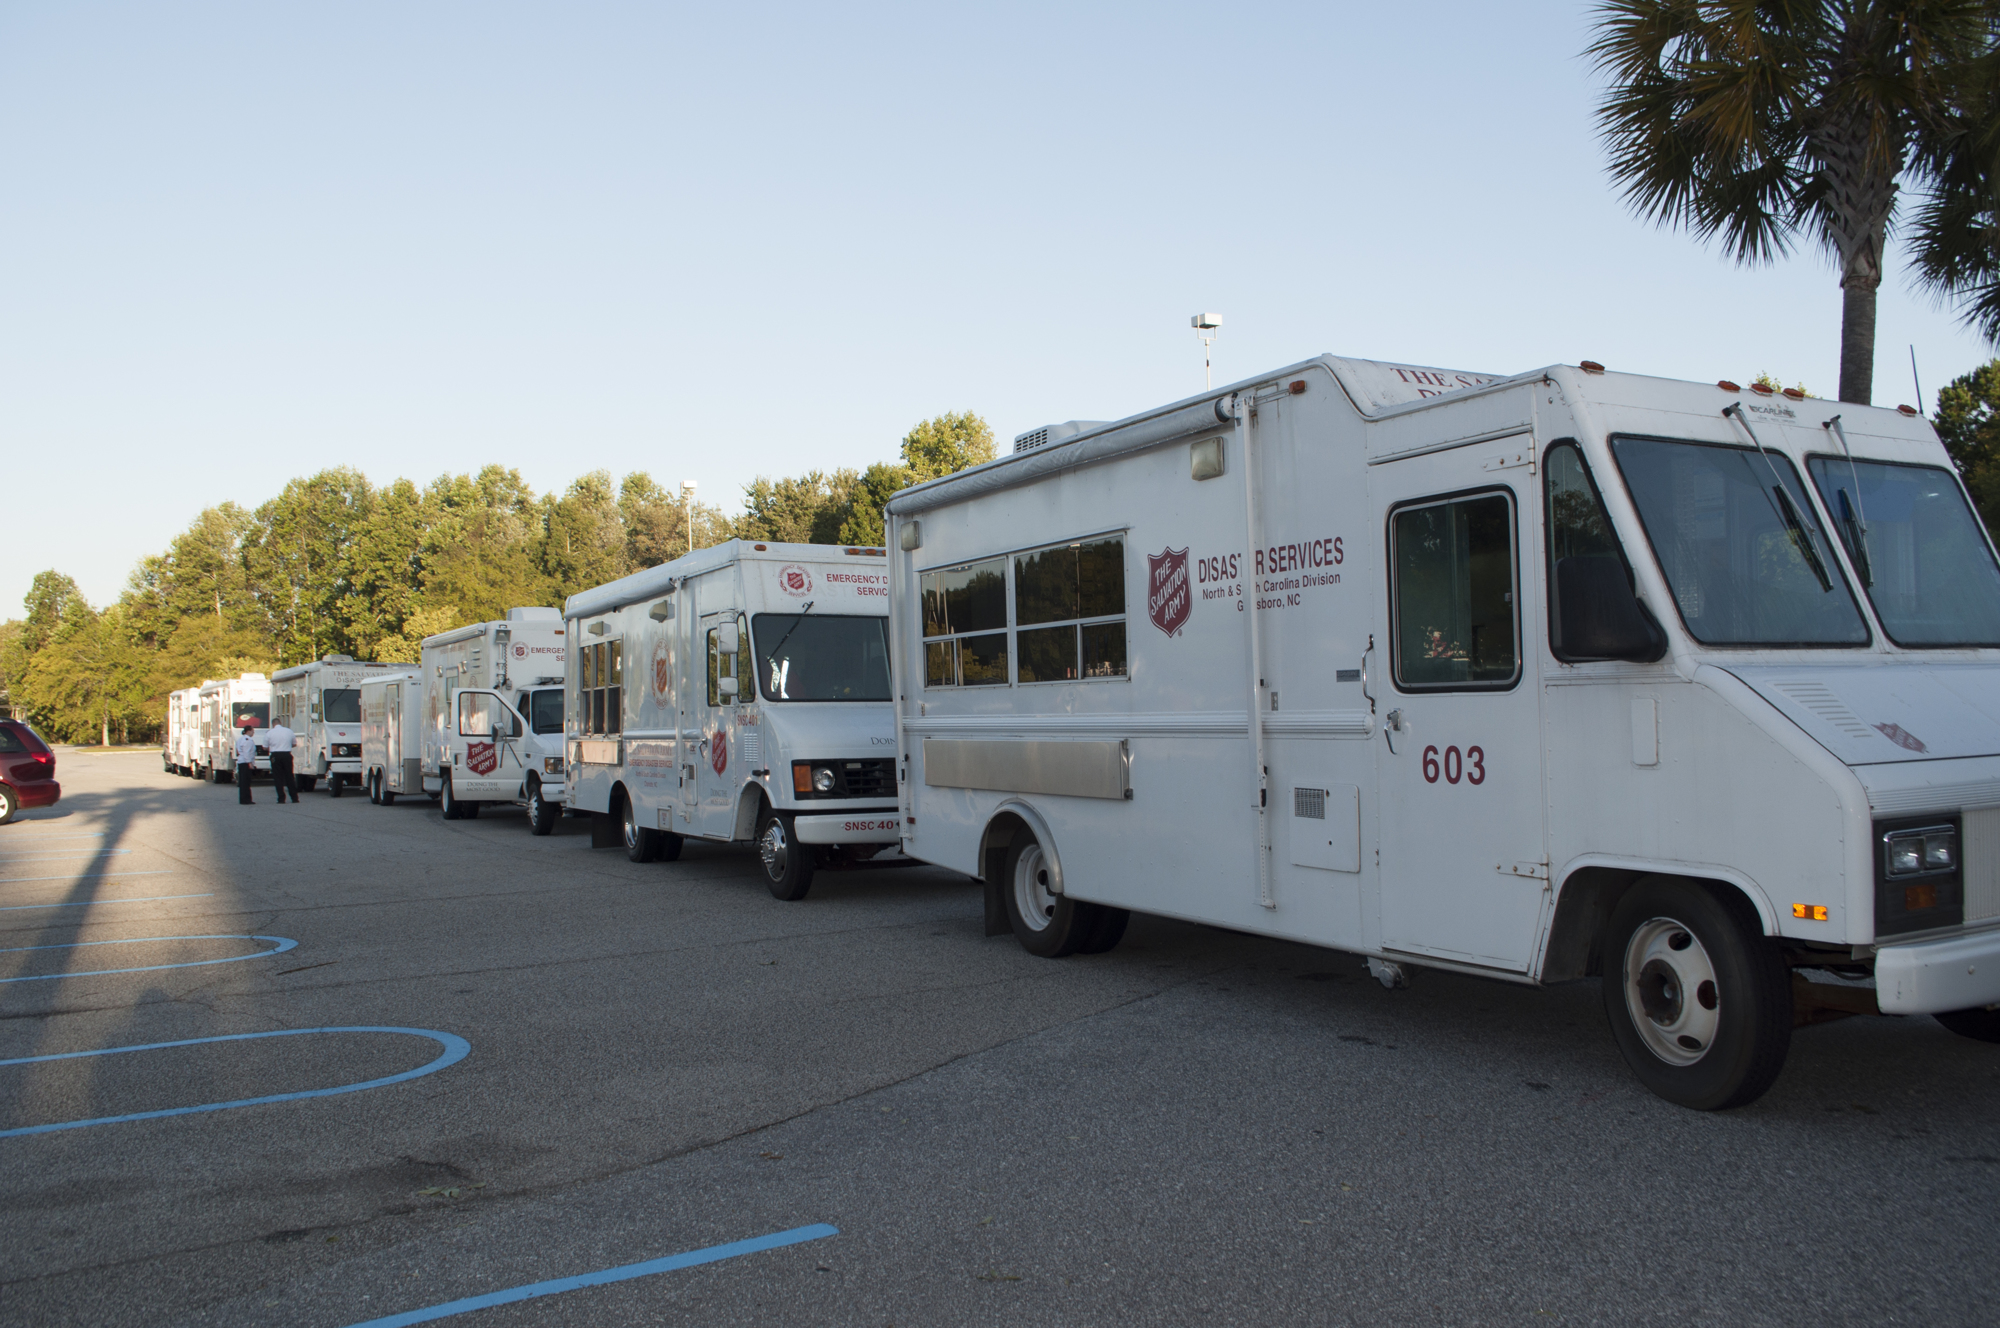 In addition to The Salvation Army of Northeast Florida’s two mobile kitchens, 10 disaster canteens from North and South Carolina joined the effort to provide relief from Hurricane Irma.